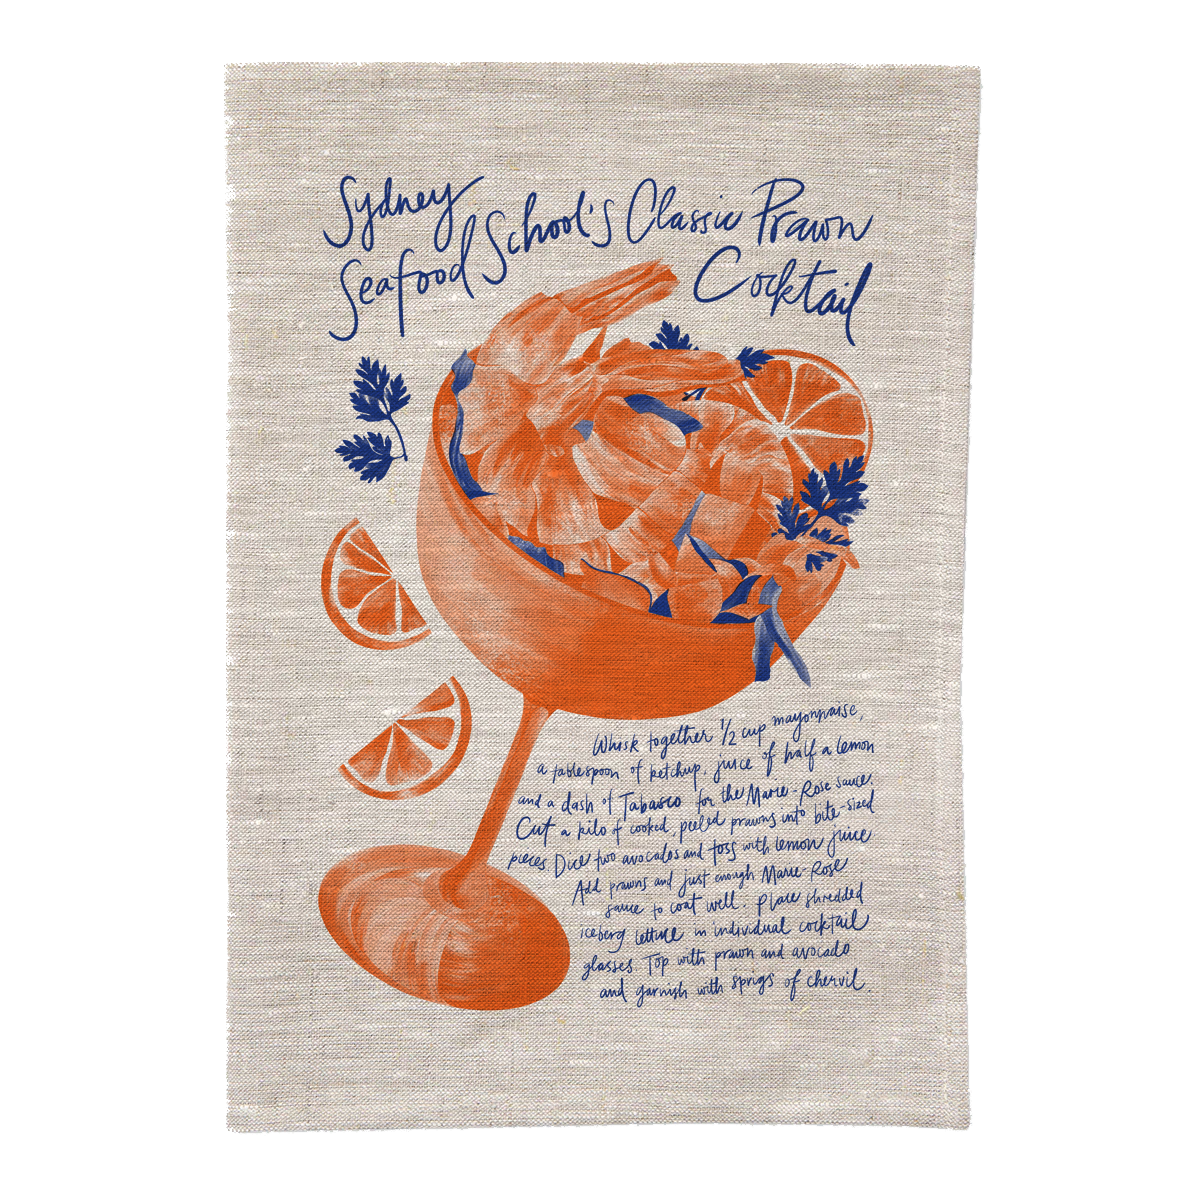 Prawn Cocktail Tea Towel (collect from Sydney Fish Market reception)